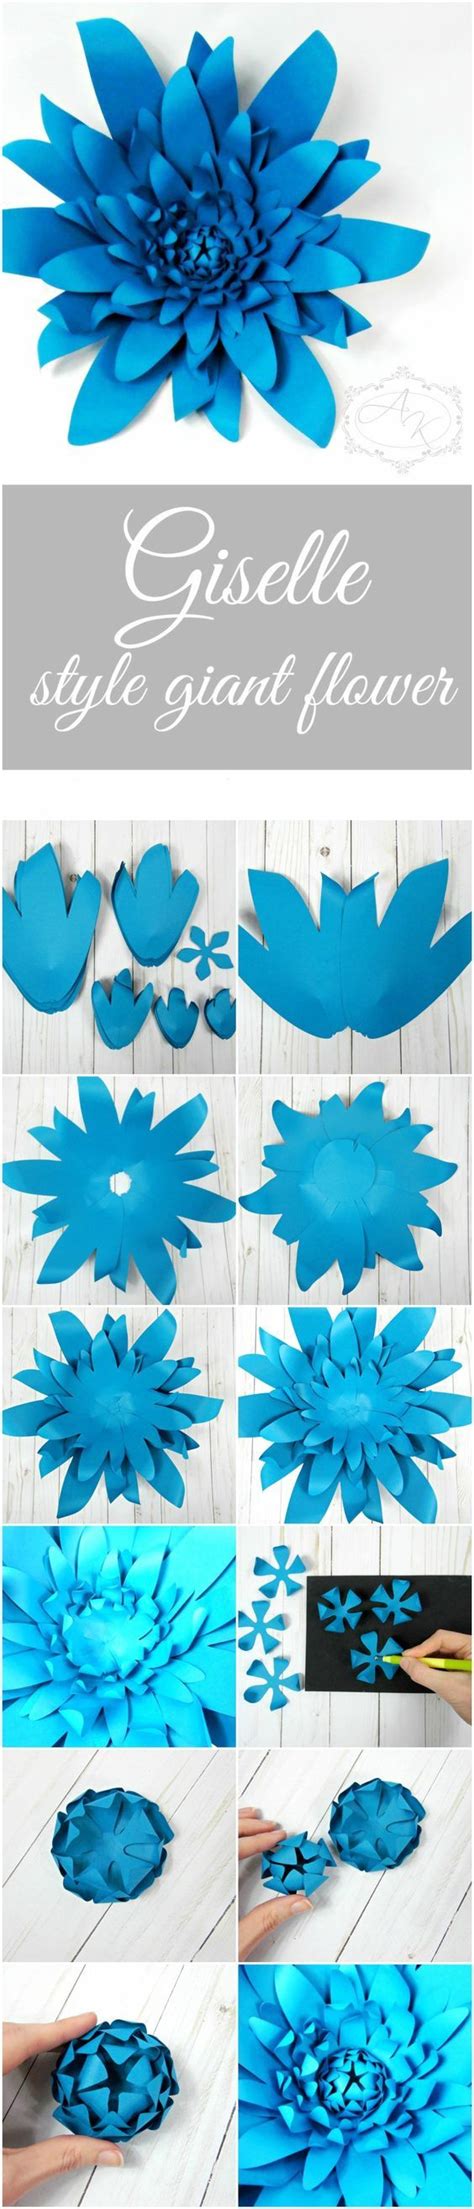 Giant Diy Paper Flower Templates With Instructions Large Backdrop